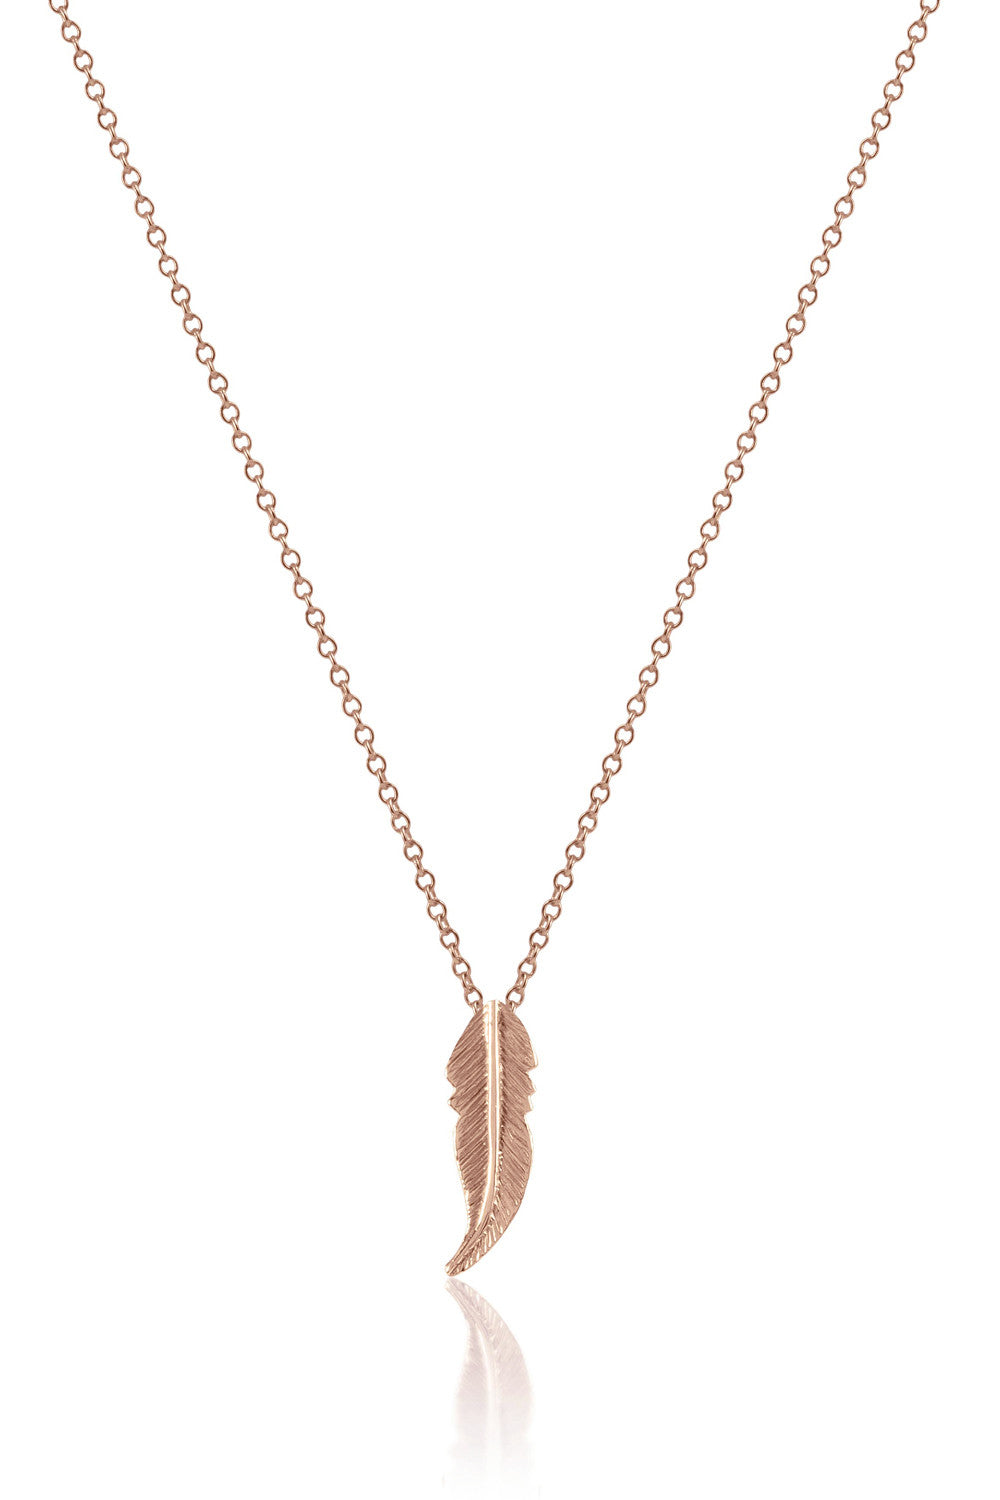 Necklace Feather 14K Pink Gold - Sophie Simone Designs